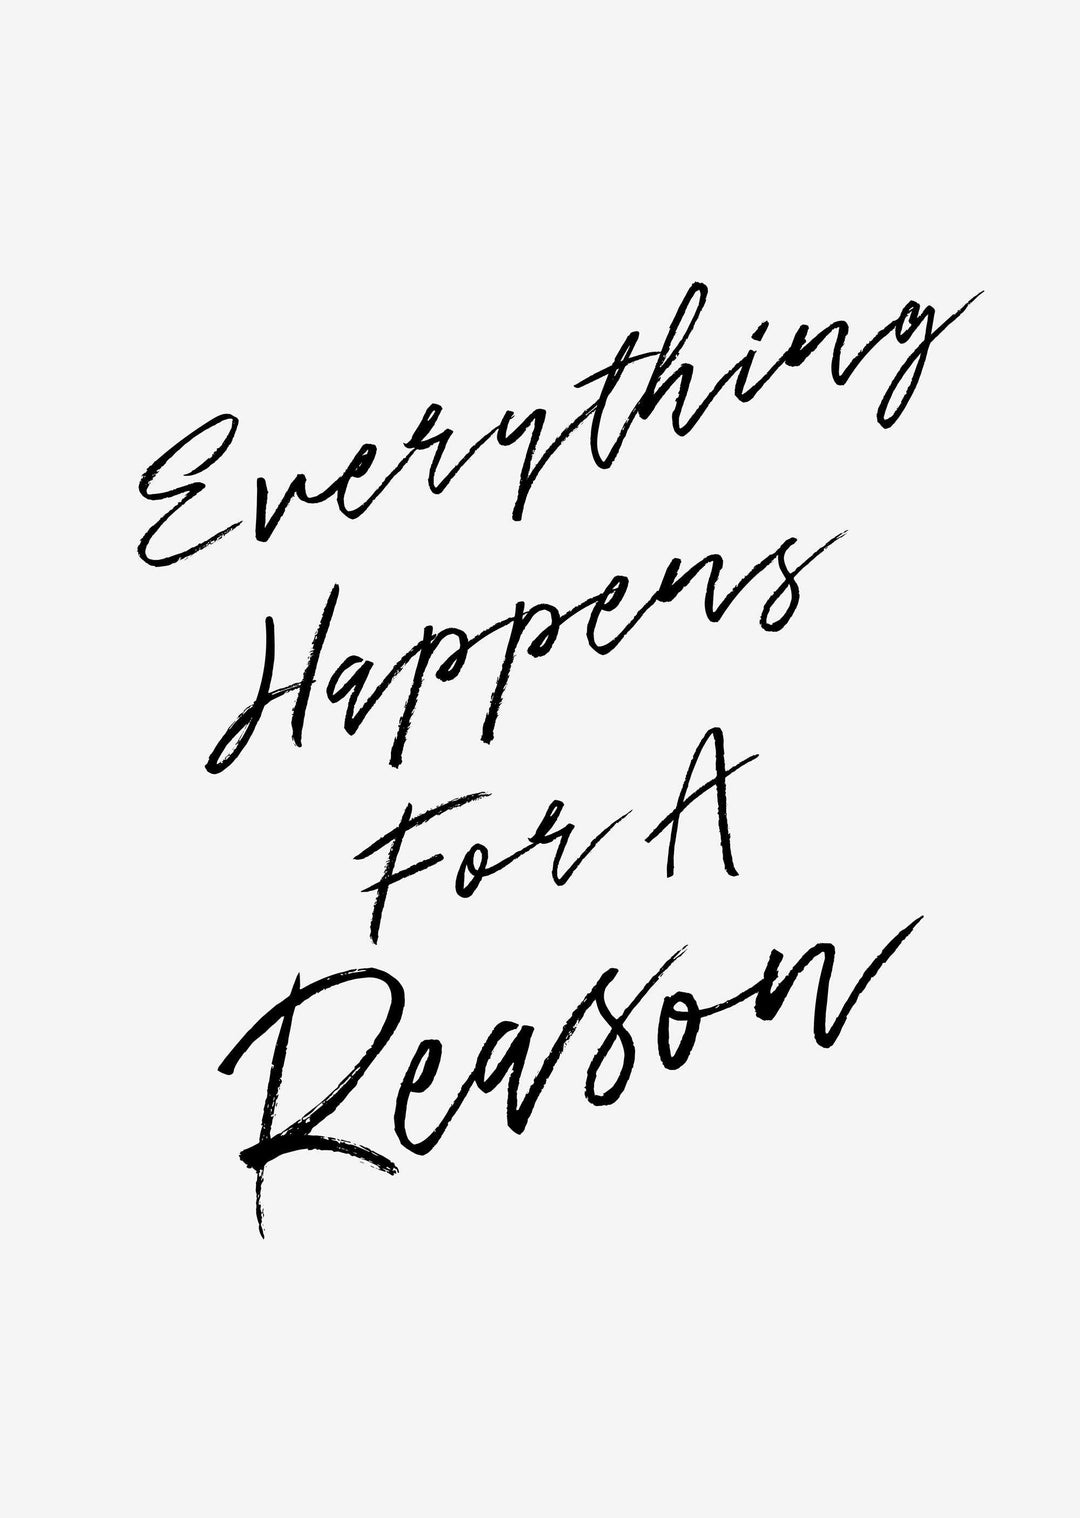 Typografisches Wandbild 'Everything Happens For A Reason'